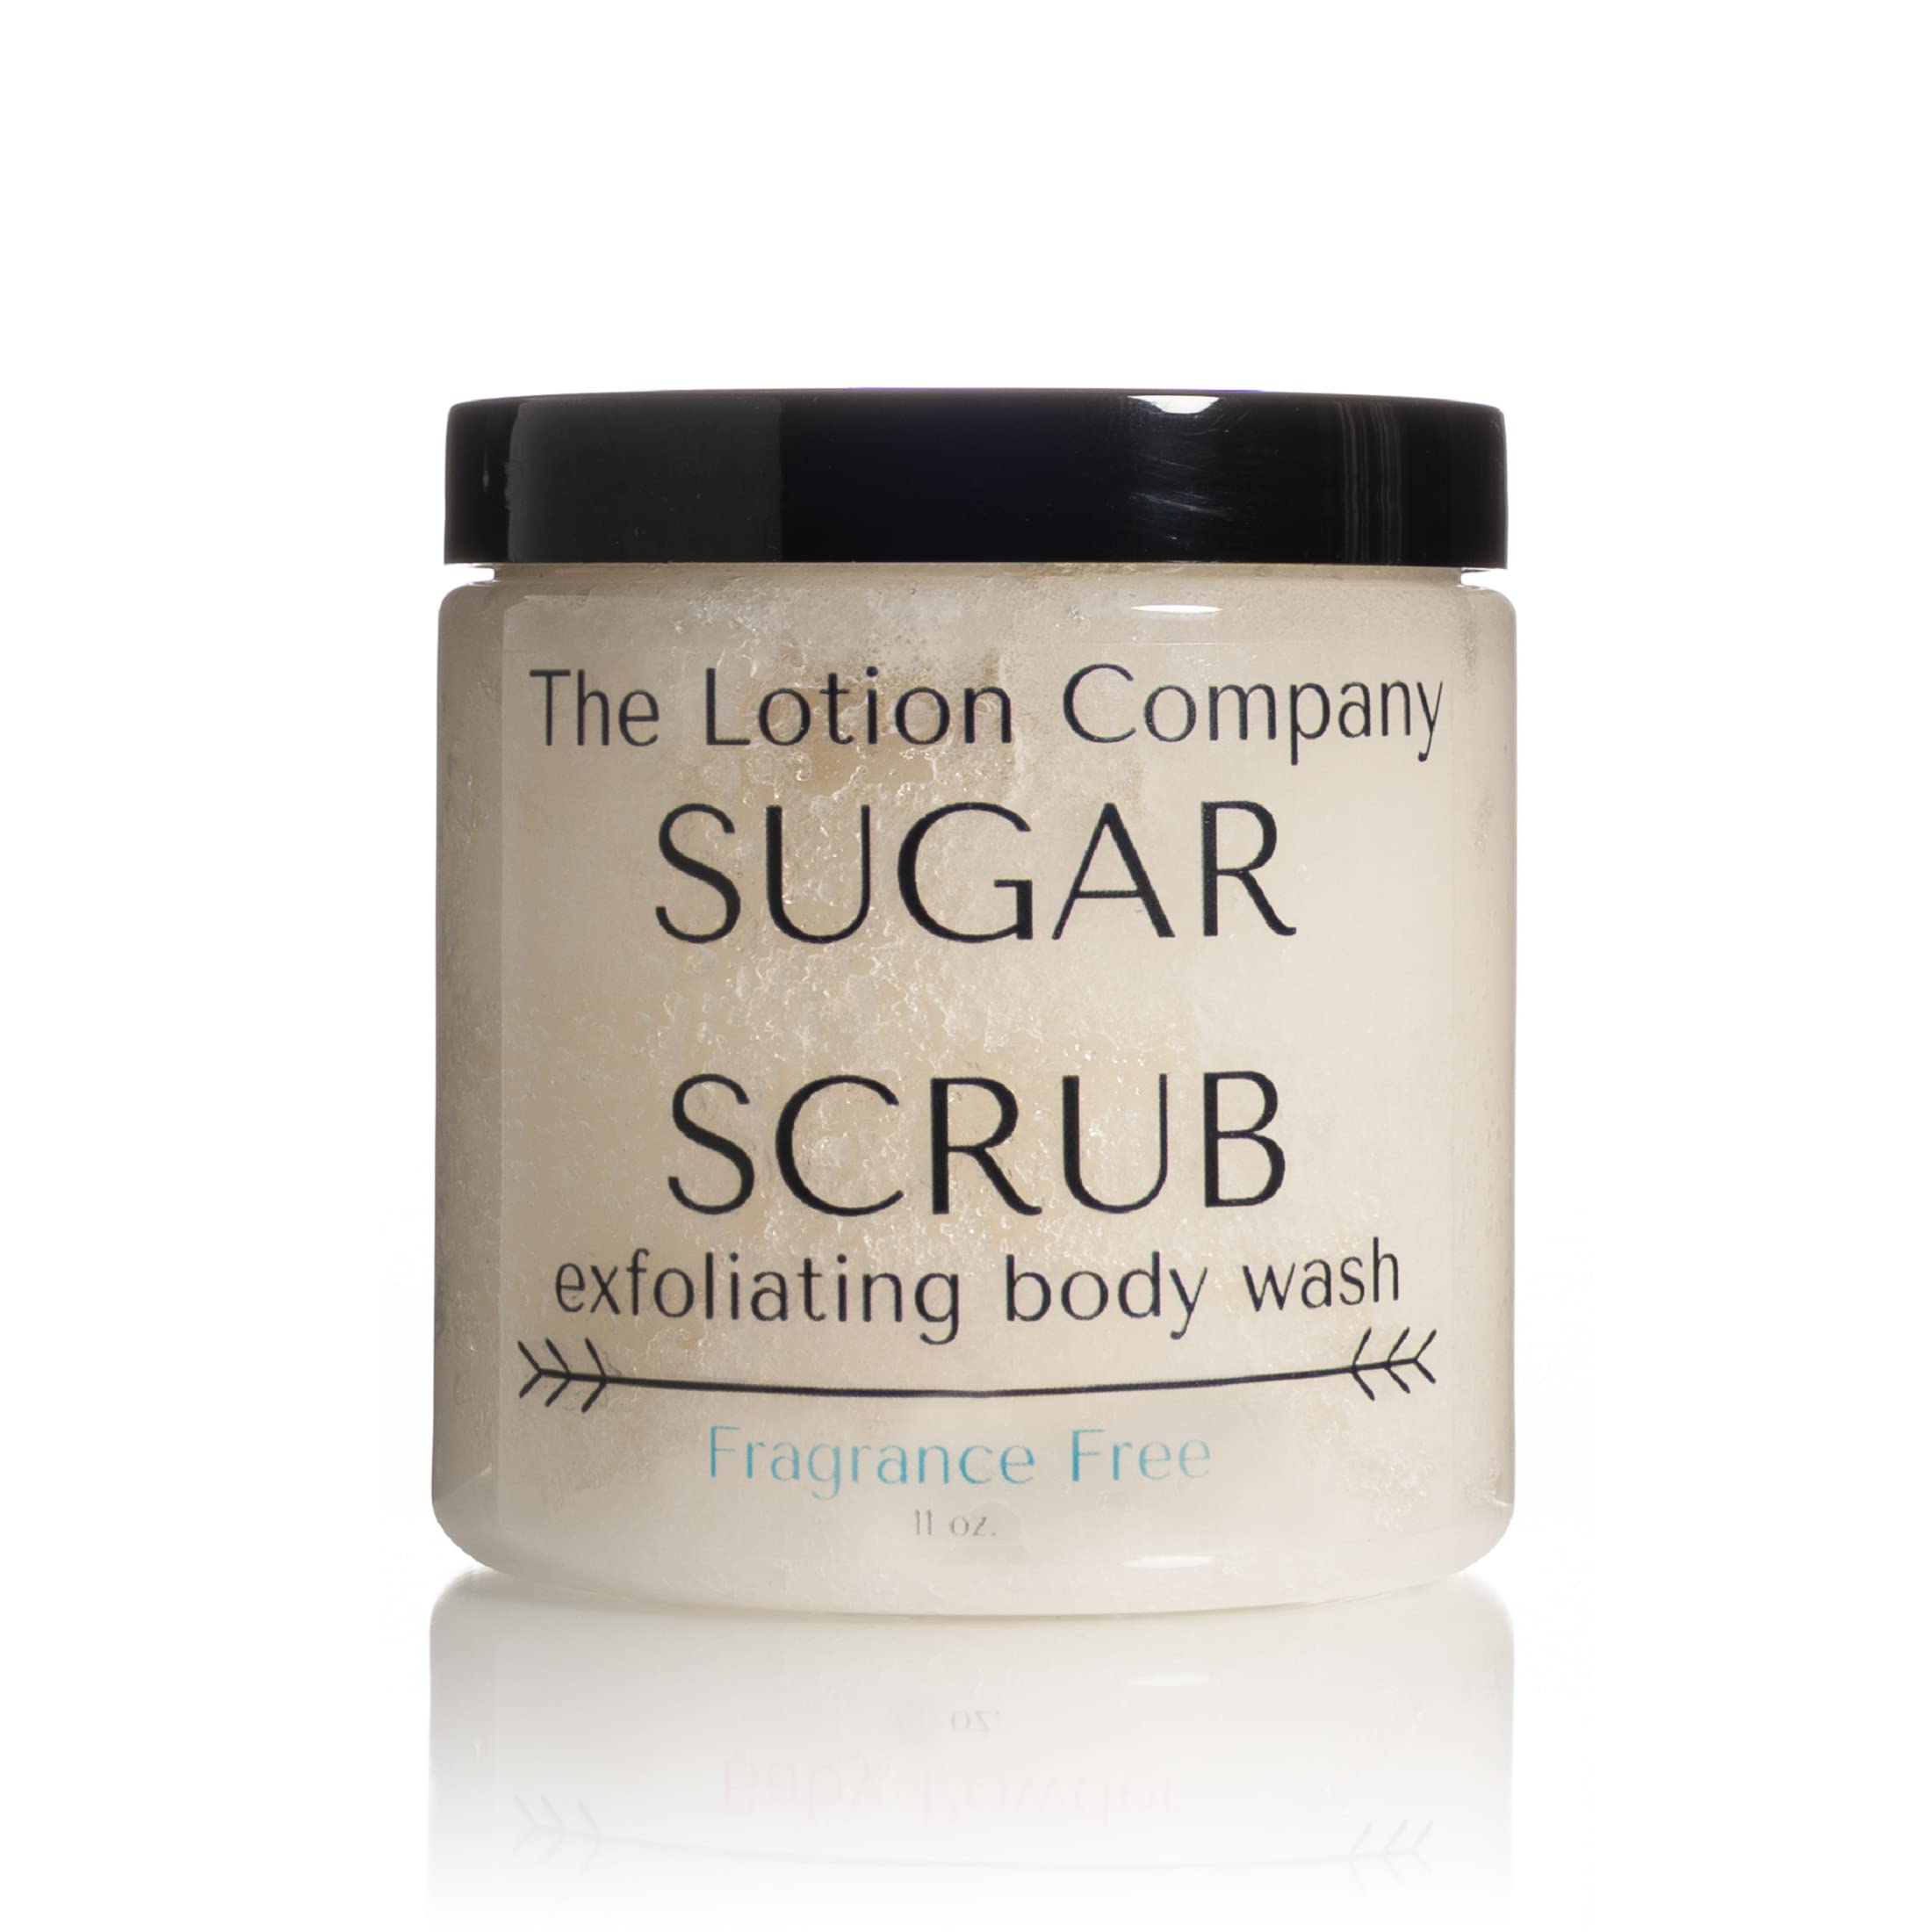 The Lotion Company Sugar Scrub Exfoliating Body Wash, Paraben Free, Cruelty Free, Made in USA, Bath and Shower Exfoliator, Fragrance Free - Unscented